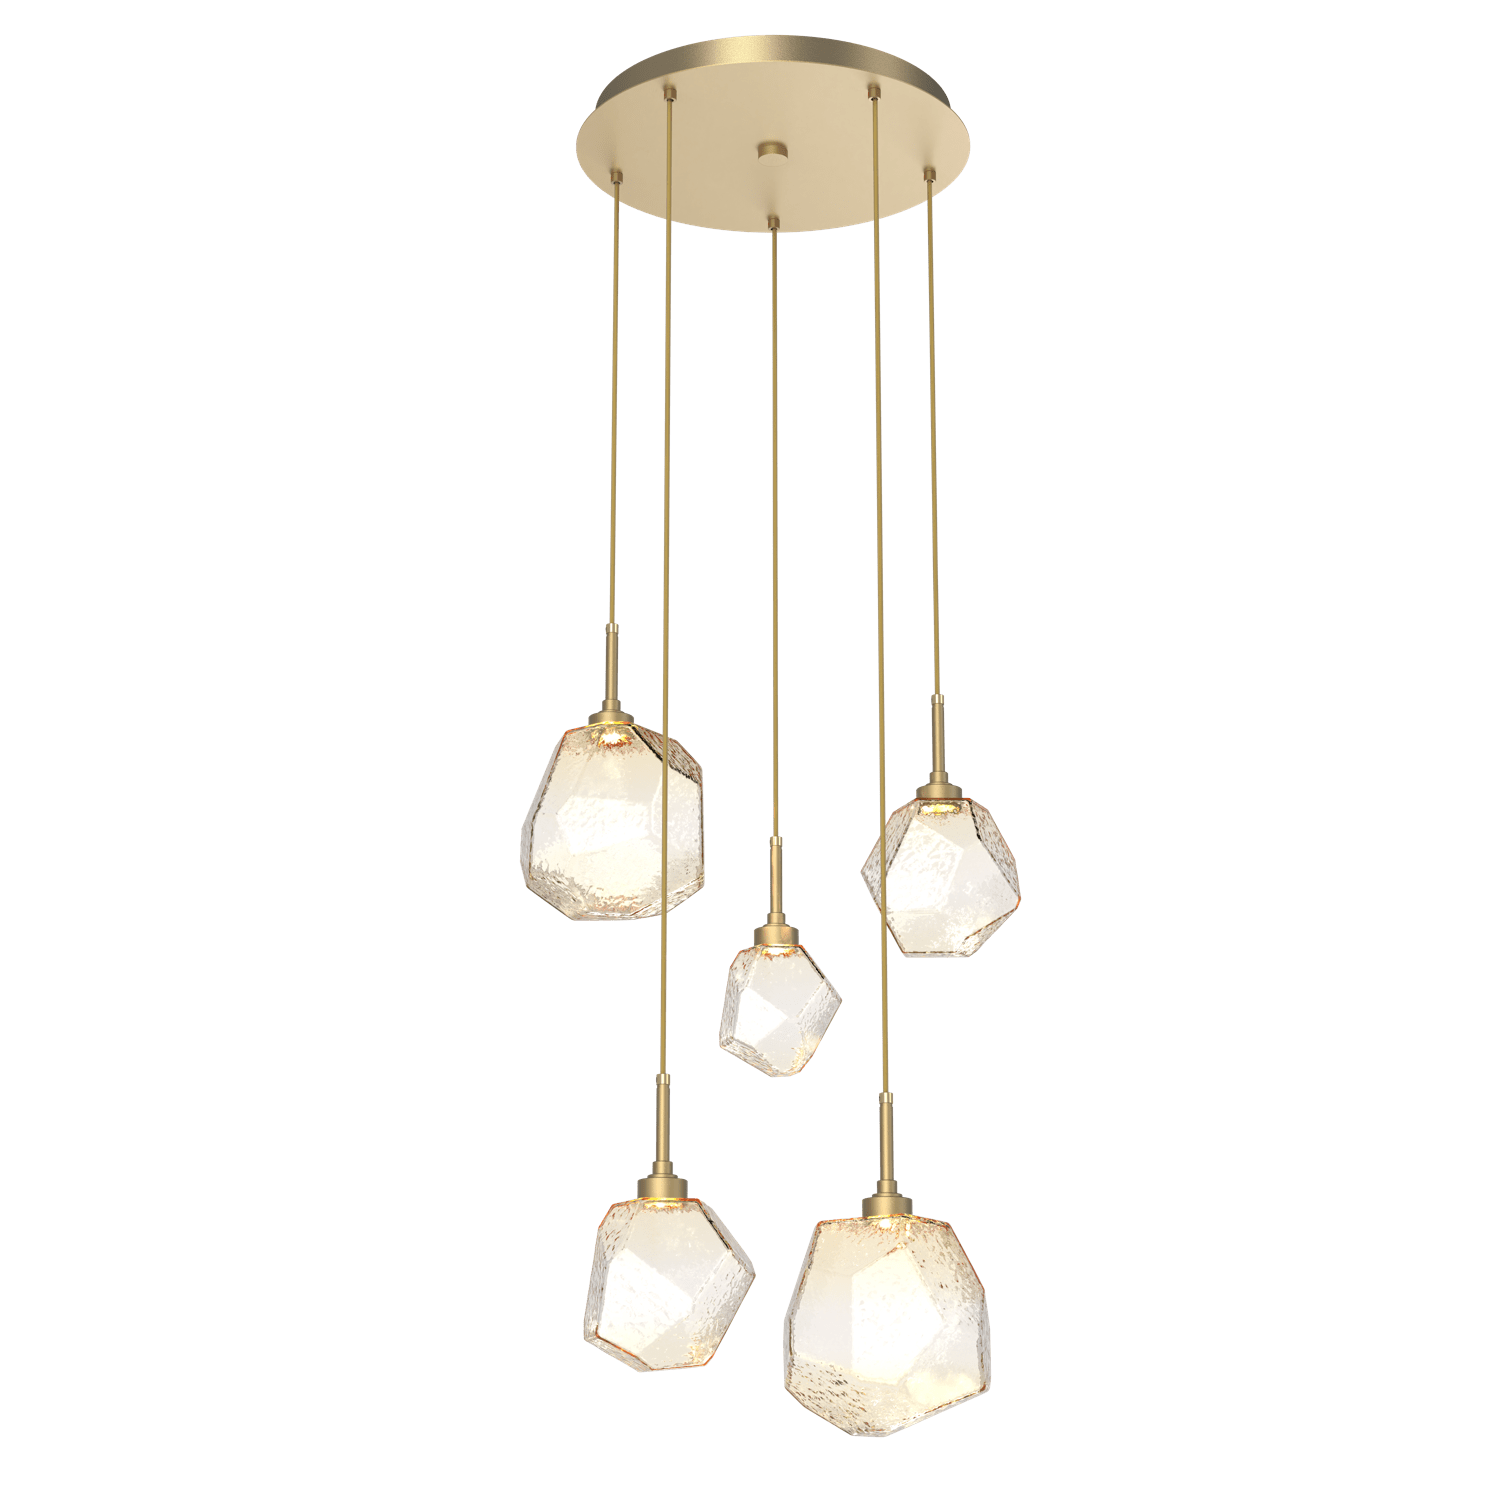 CHB0039-05-GB-A-Hammerton-Studio-Gem-5-light-round-pendant-chandelier-with-gilded-brass-finish-and-amber-blown-glass-shades-and-LED-lamping